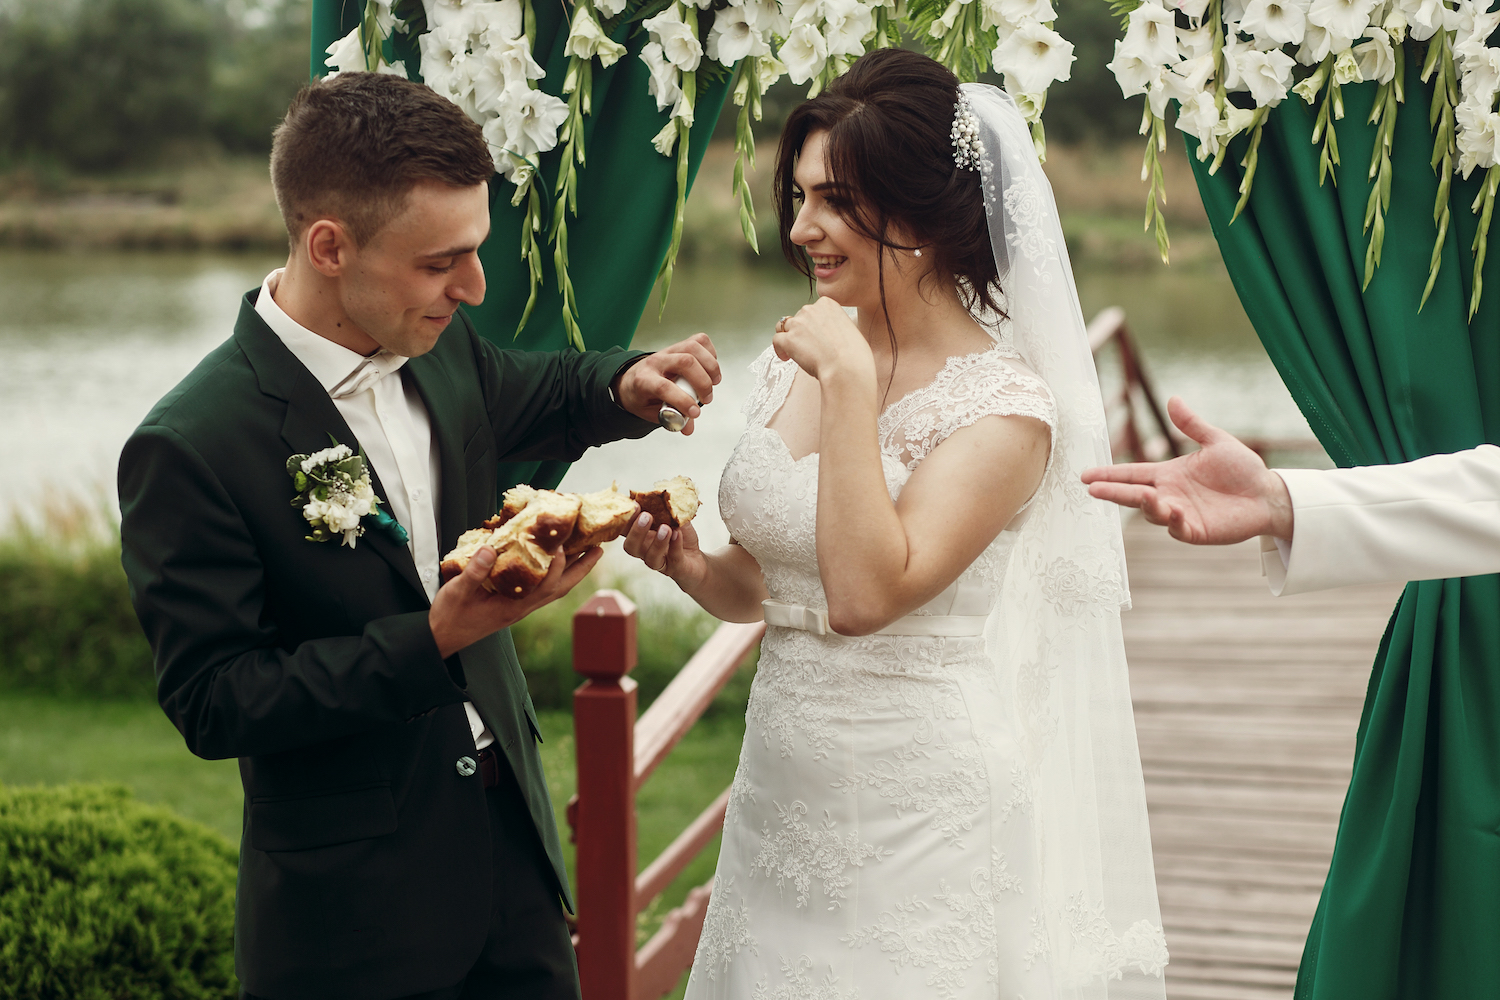 Happy newlywed couple breaking bread at wedding ceremony, handsome groom and smiling bride eating bread near wedding aisle during slavic tradition outdoors